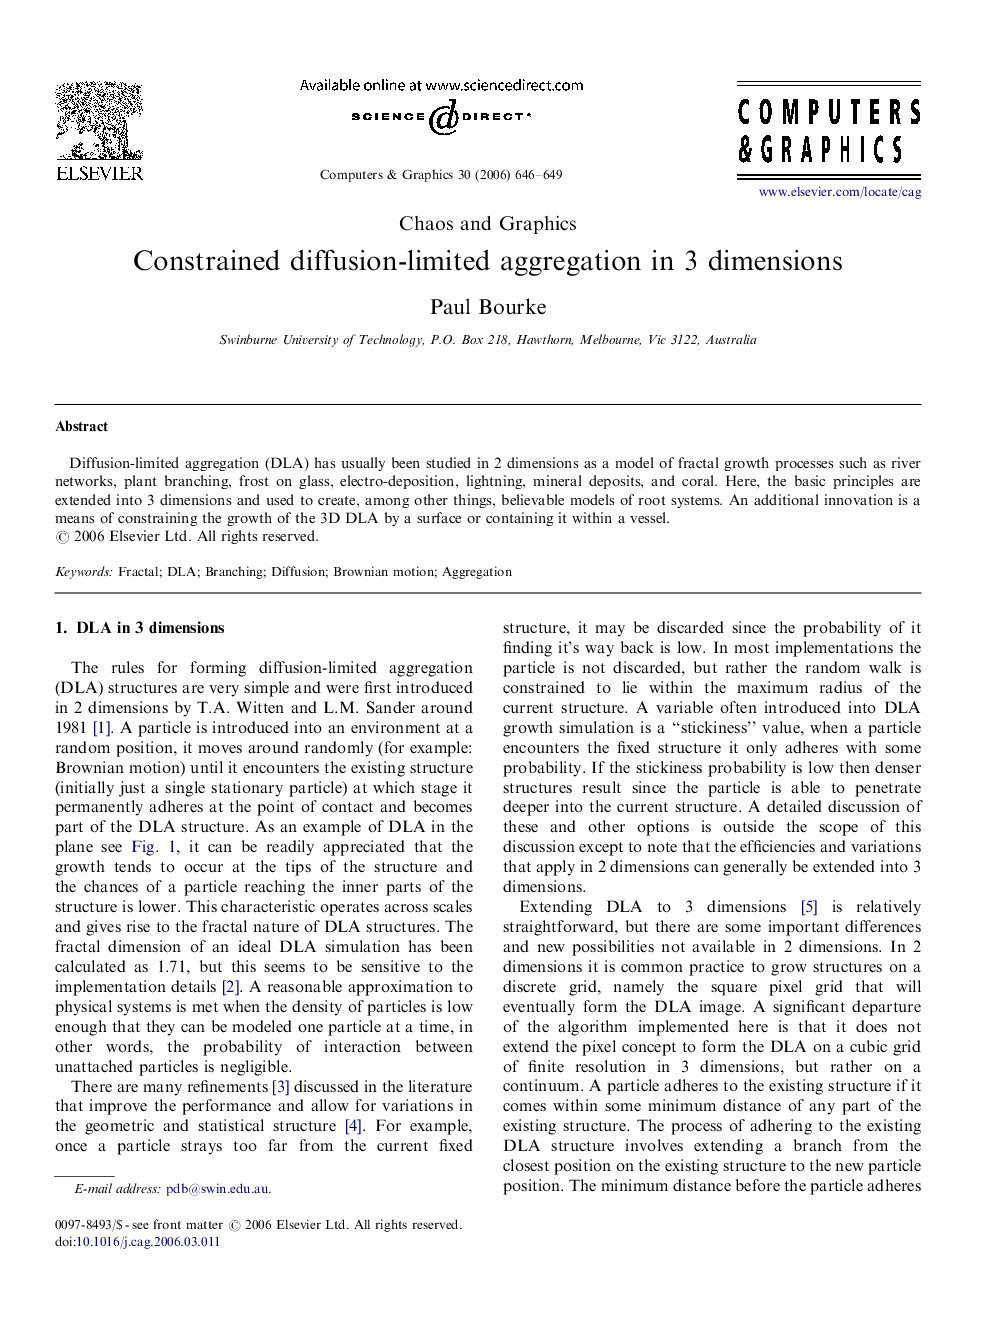 Constrained diffusion-limited aggregation in 3 dimensions